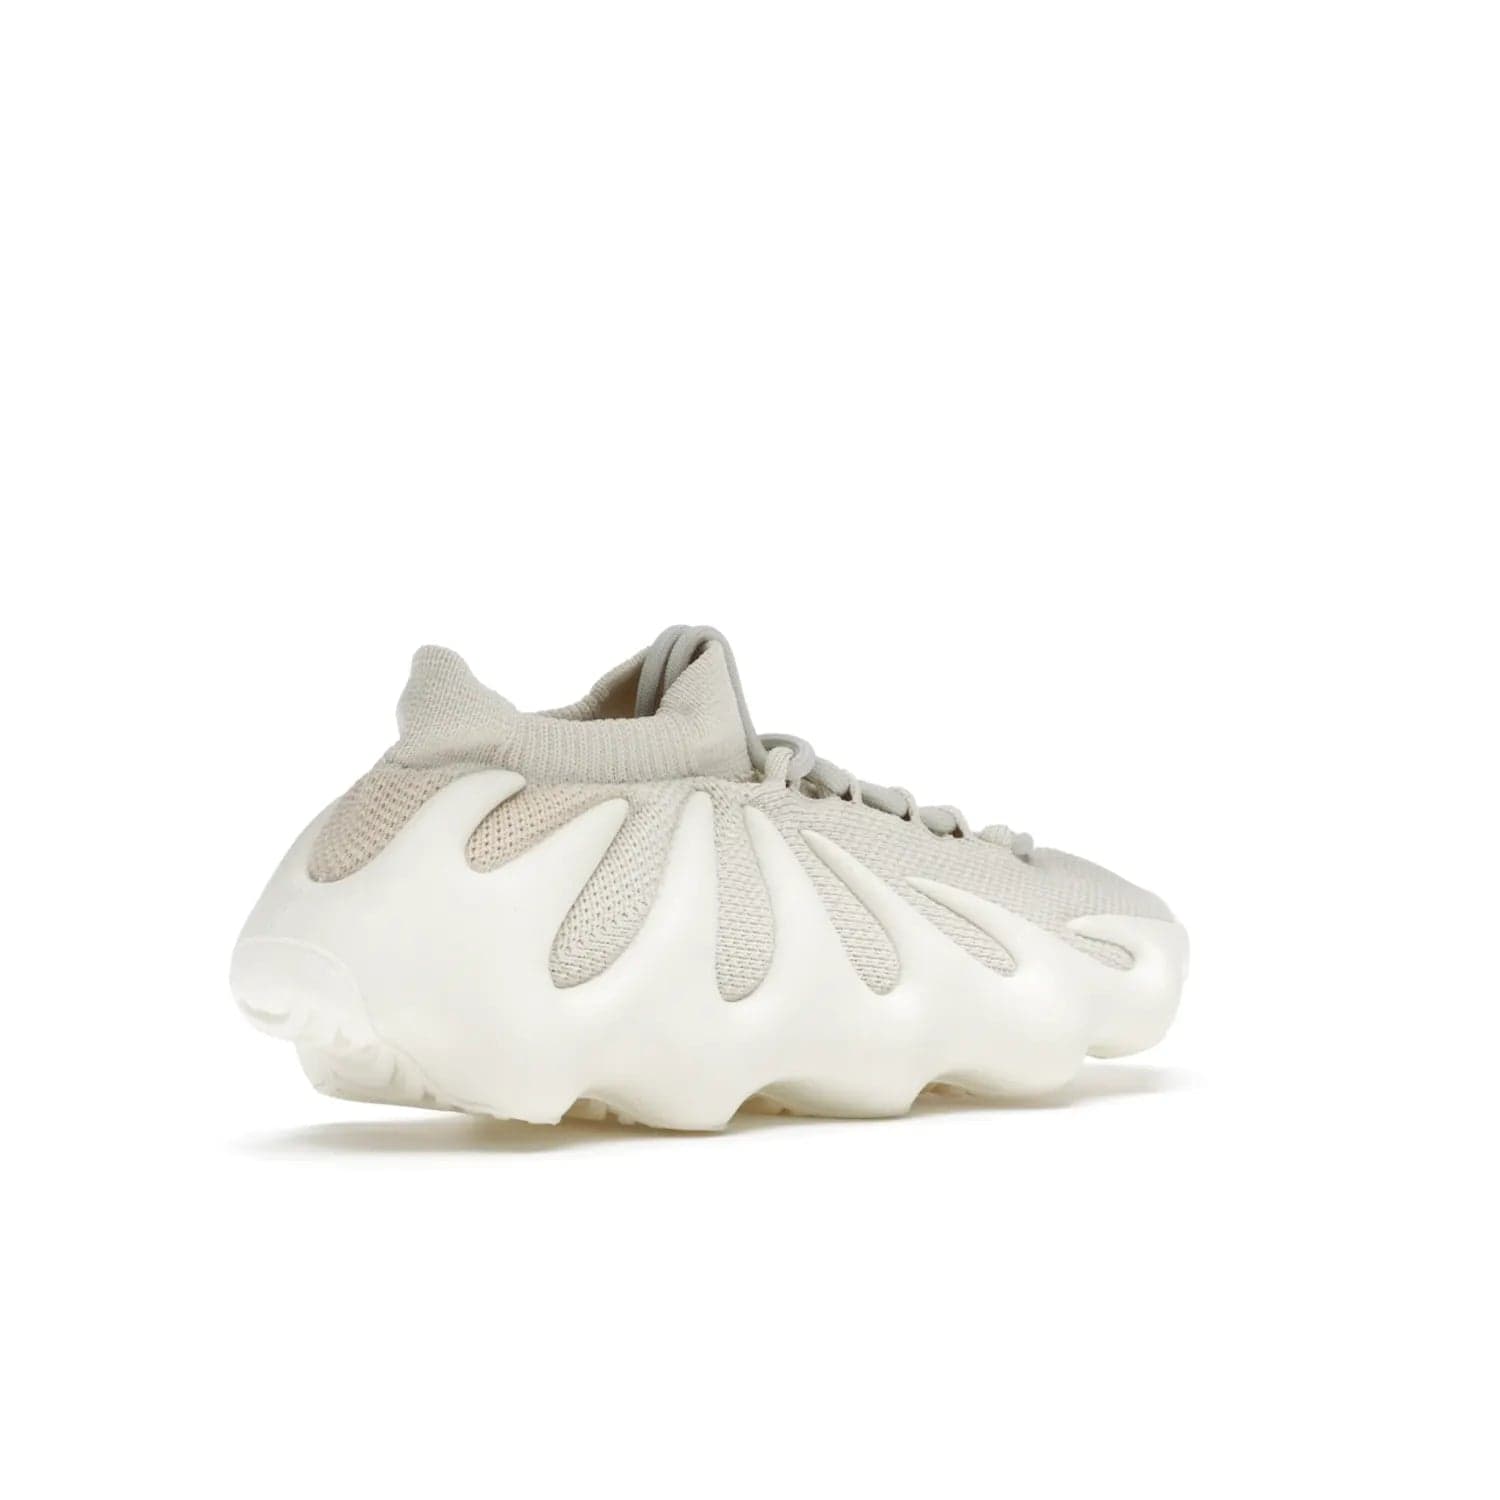 adidas Yeezy 450 Cloud White - Image 33 - Only at www.BallersClubKickz.com - Experience the future with the adidas Yeezy 450 Cloud White. A two-piece design featuring an extreme foam sole and mesh upper, this silhouette is expected to release in March 2021. Get your hands on this striking Cloud White/Cloud White colorway and stand out in the crowd.